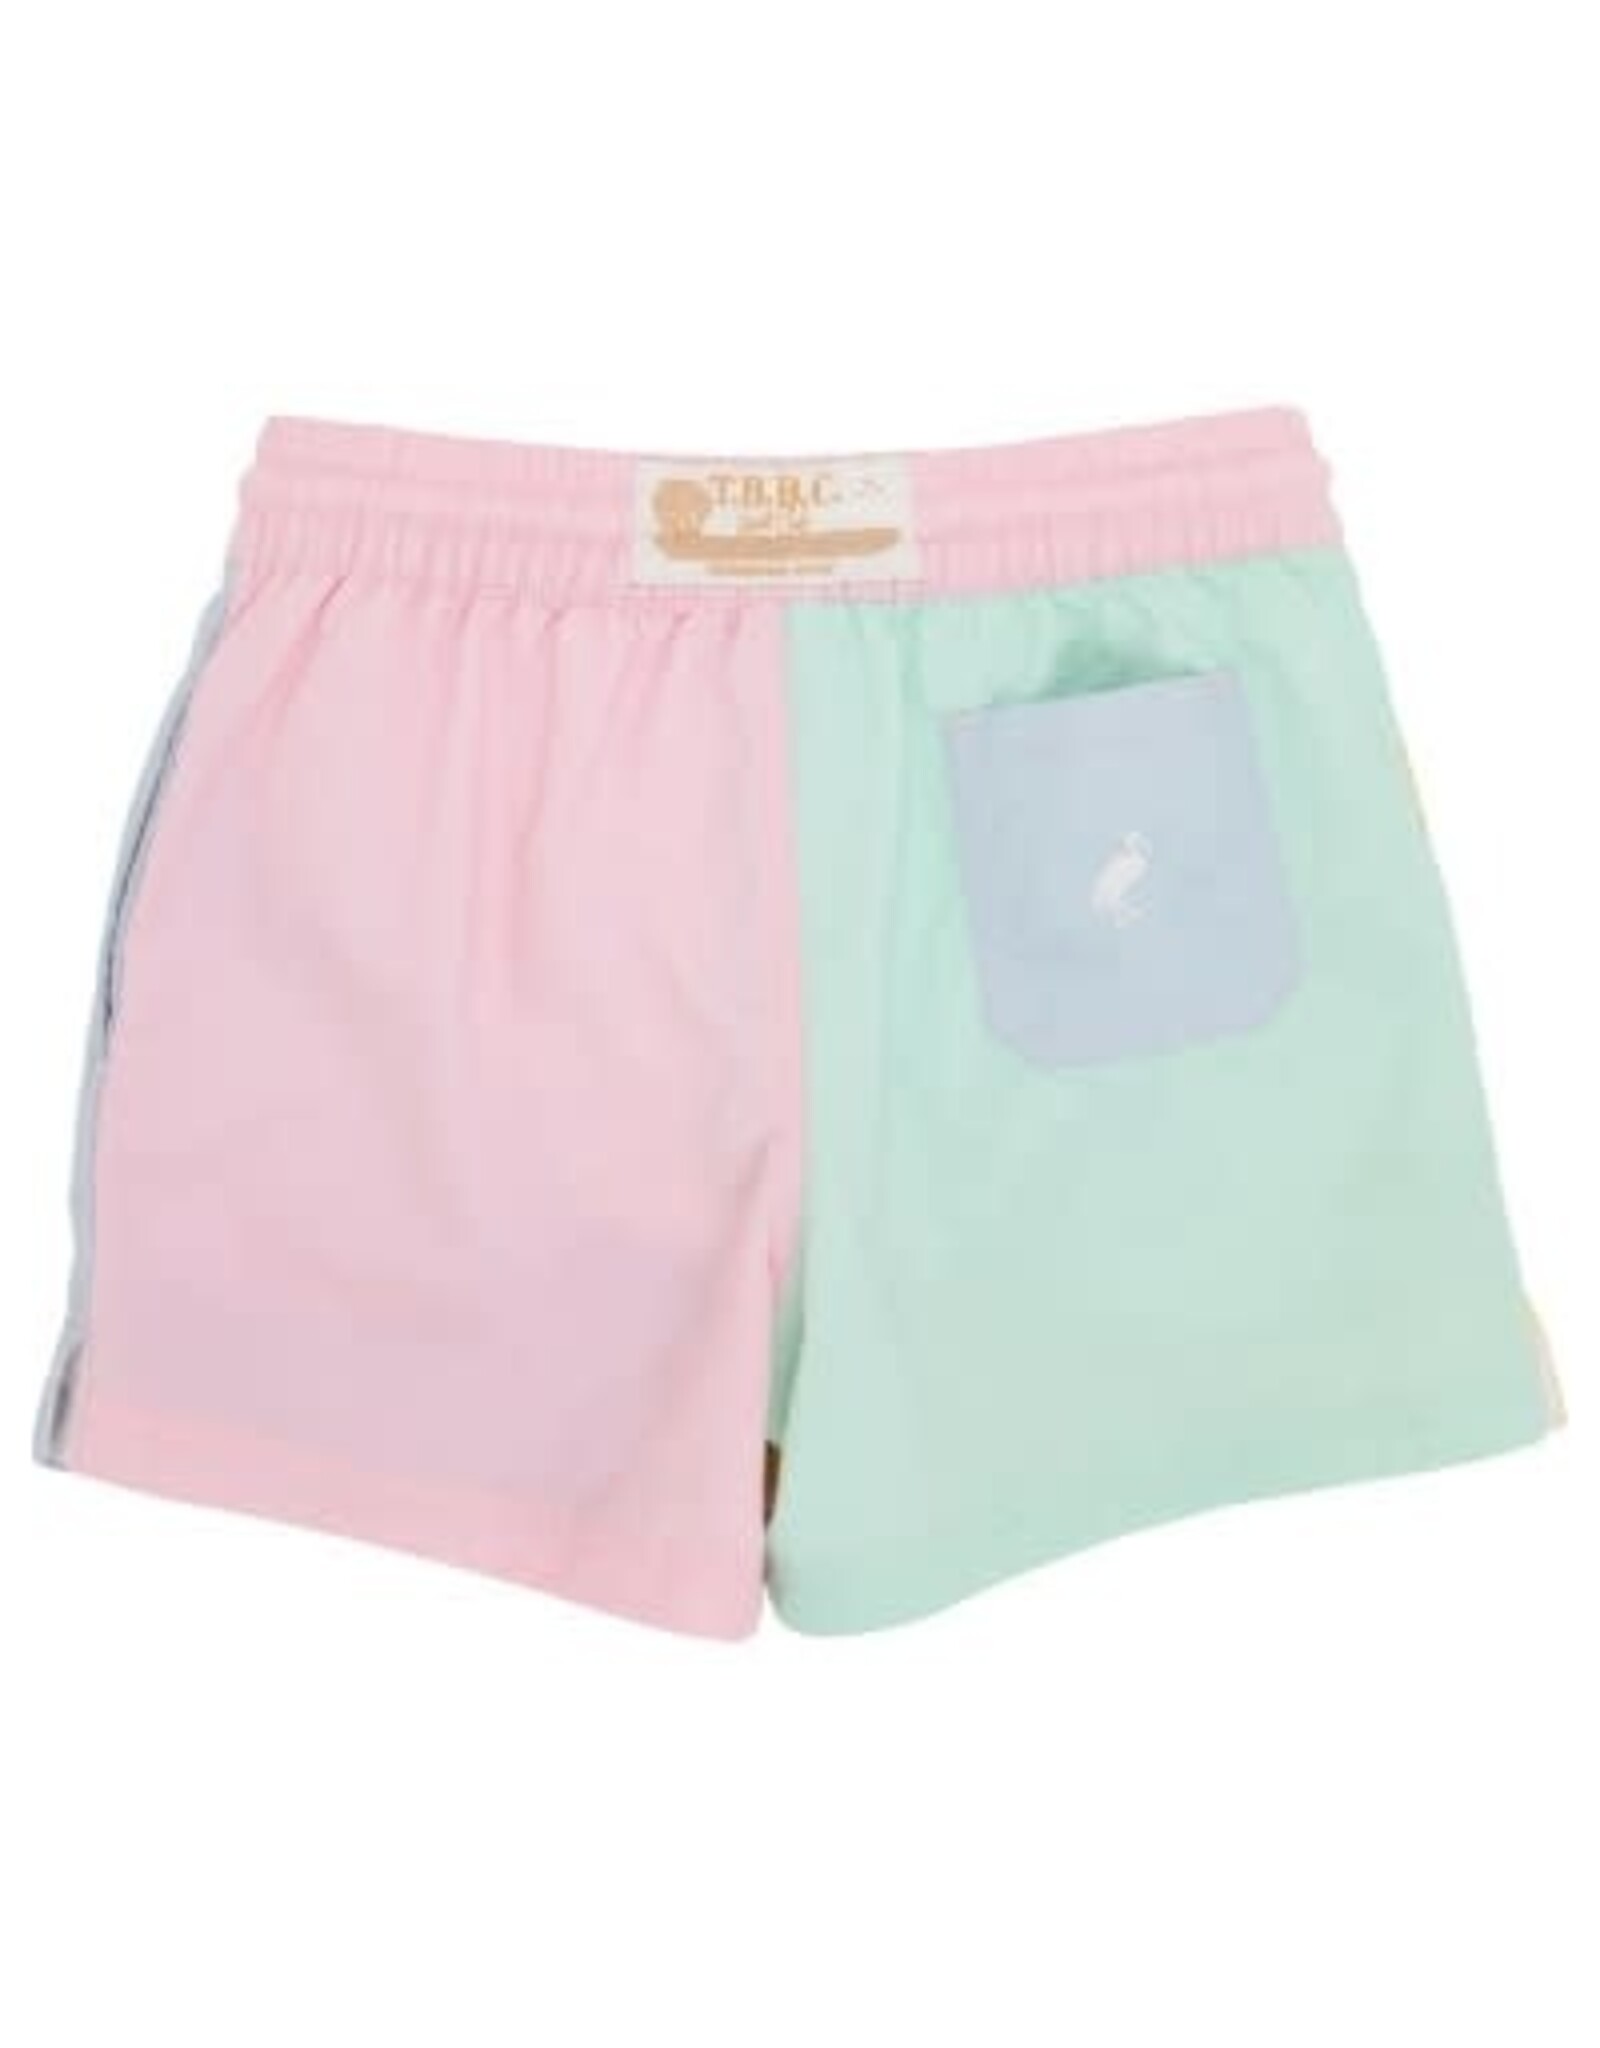 The Beaufort Bonnet Company Country Club Colorblock Trunk- Yellow, Pink, Blue, Seafoam